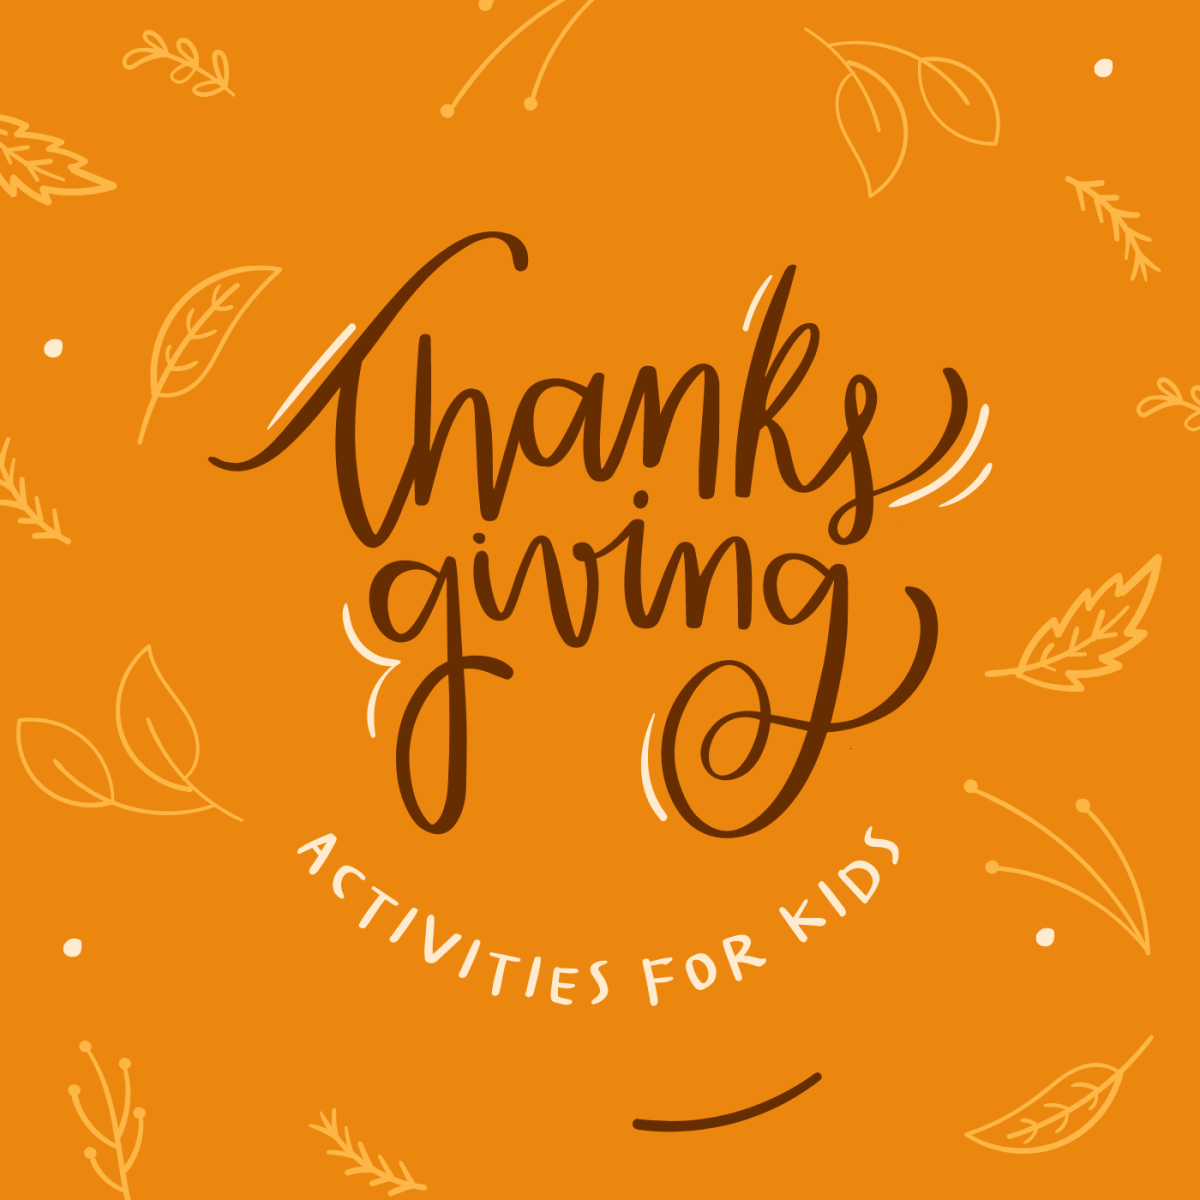 Teach your kids about Thanksgiving with these five fun activities!